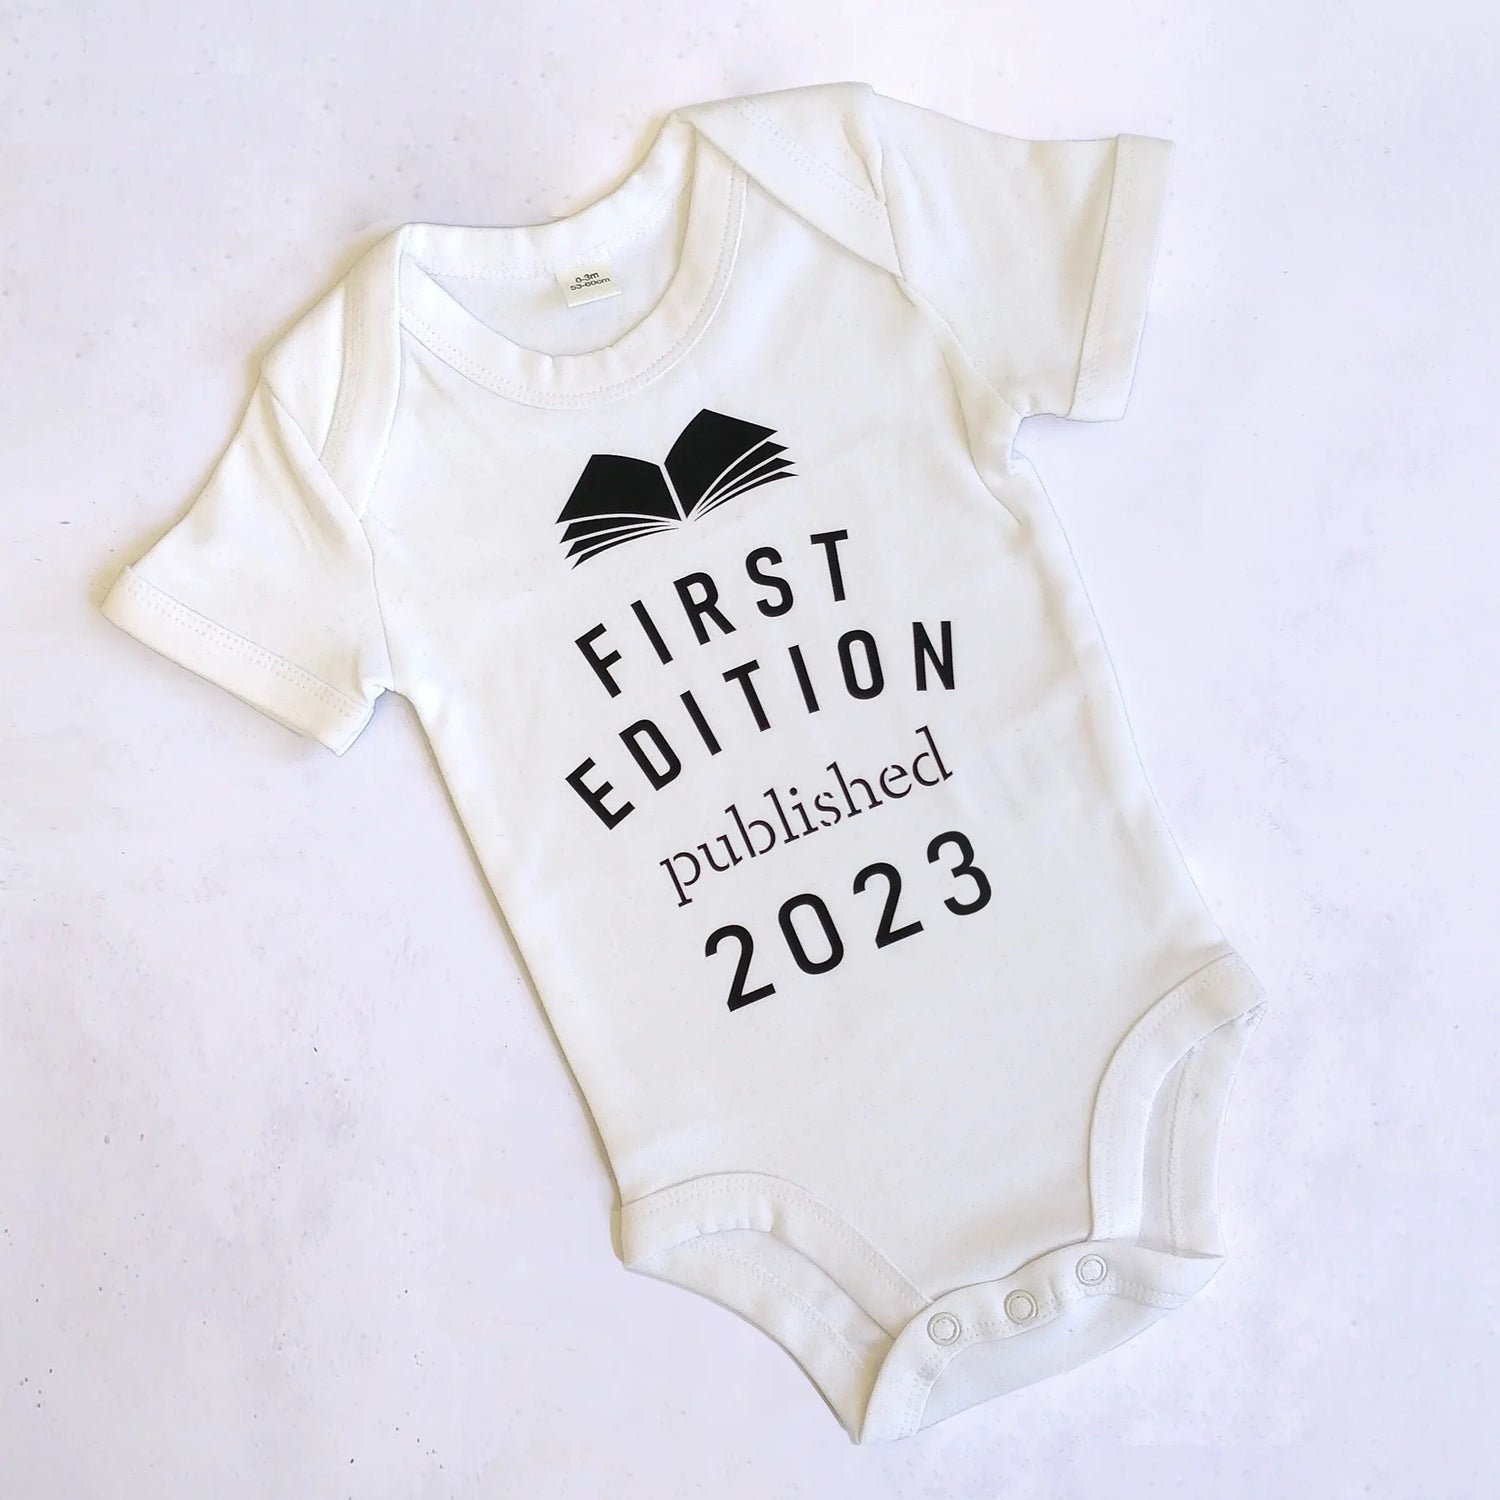 First Edition Baby Vest